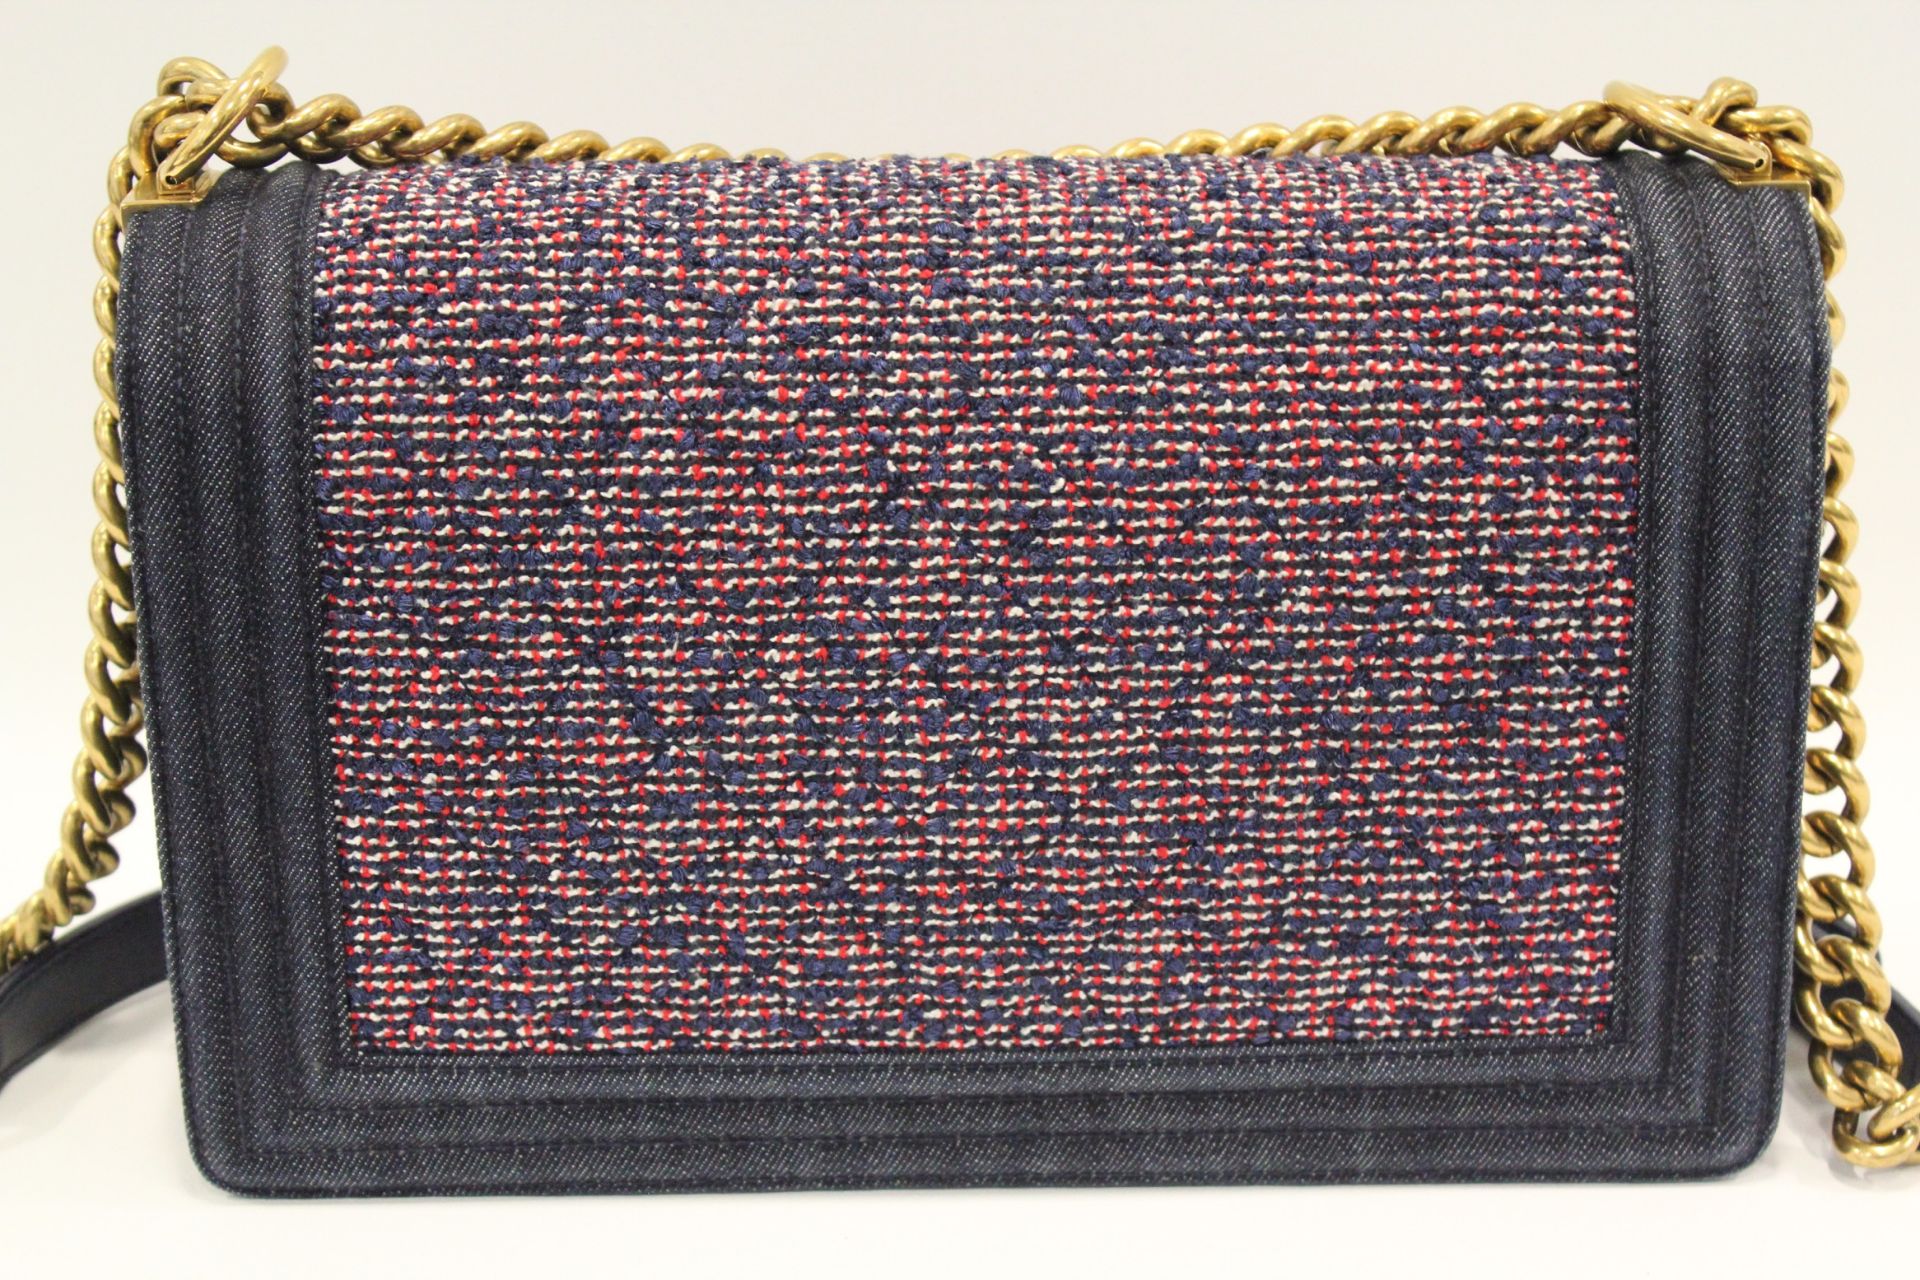 CHANEL Special Edition Le Boy Bag _ (New Medium Size) _ Denim|Leather|Tweed - Image 8 of 10